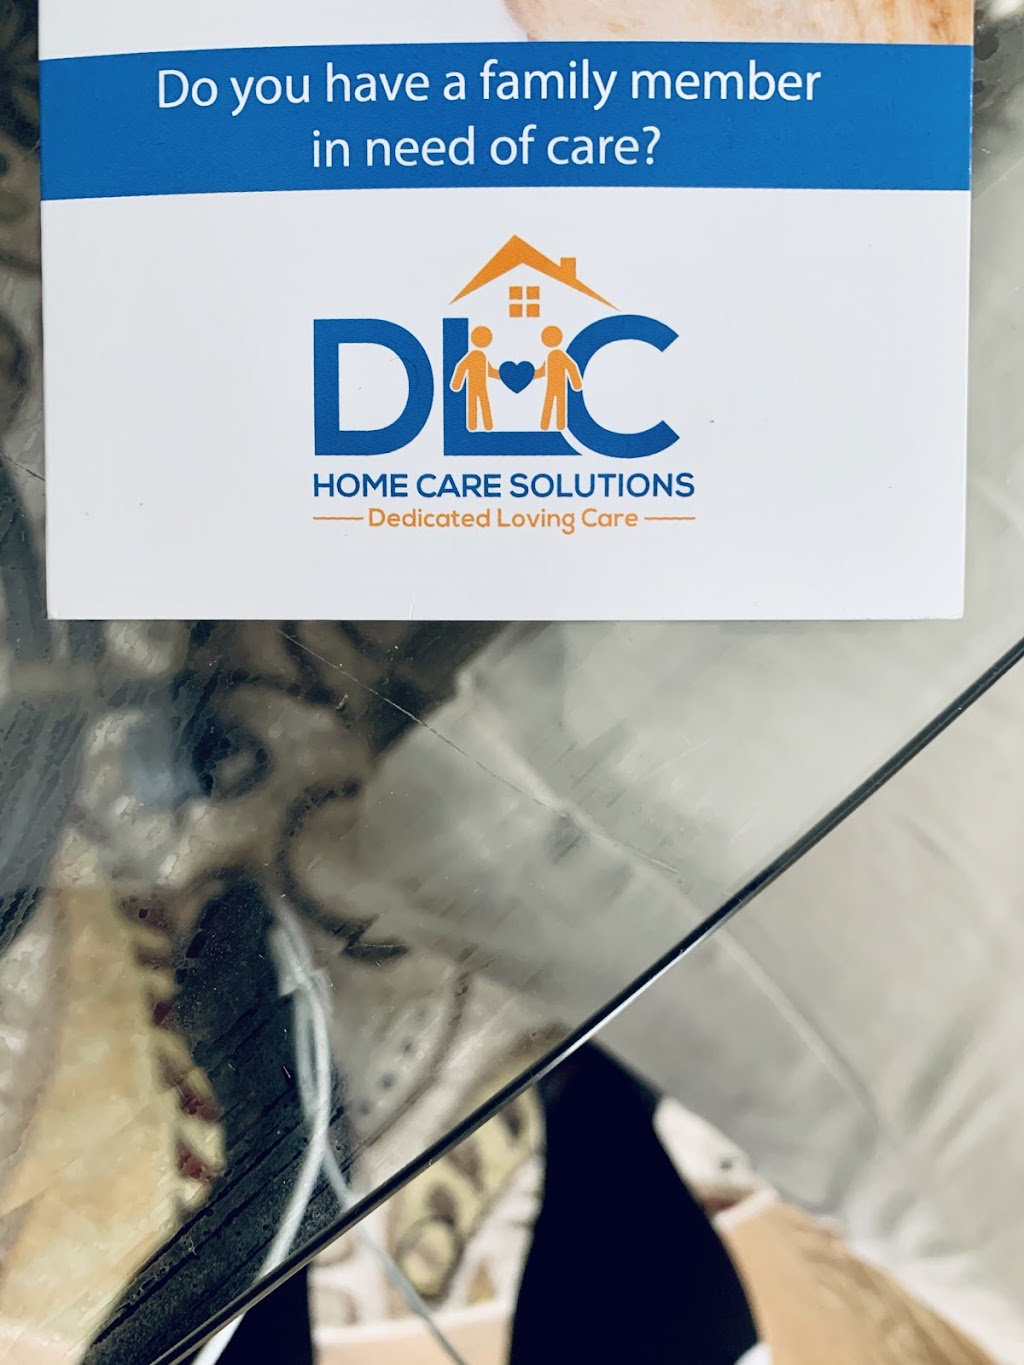 DLC Home Care Solutions LLC | 8869 Centre St Ste B1, Southaven, MS 38671, USA | Phone: (662) 782-4947